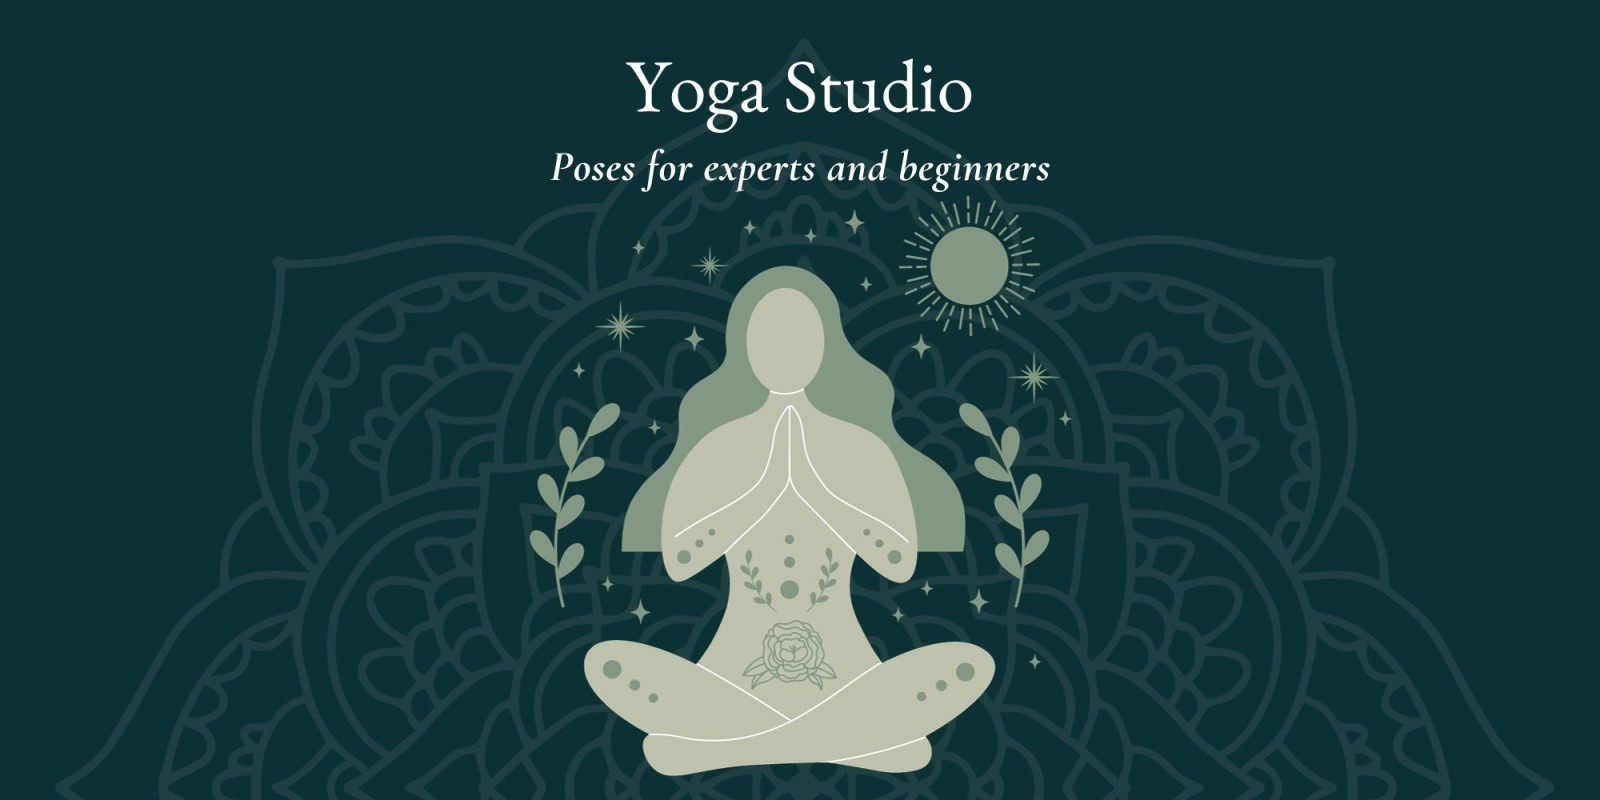 Yoga Studio: Poses for experts and beginners